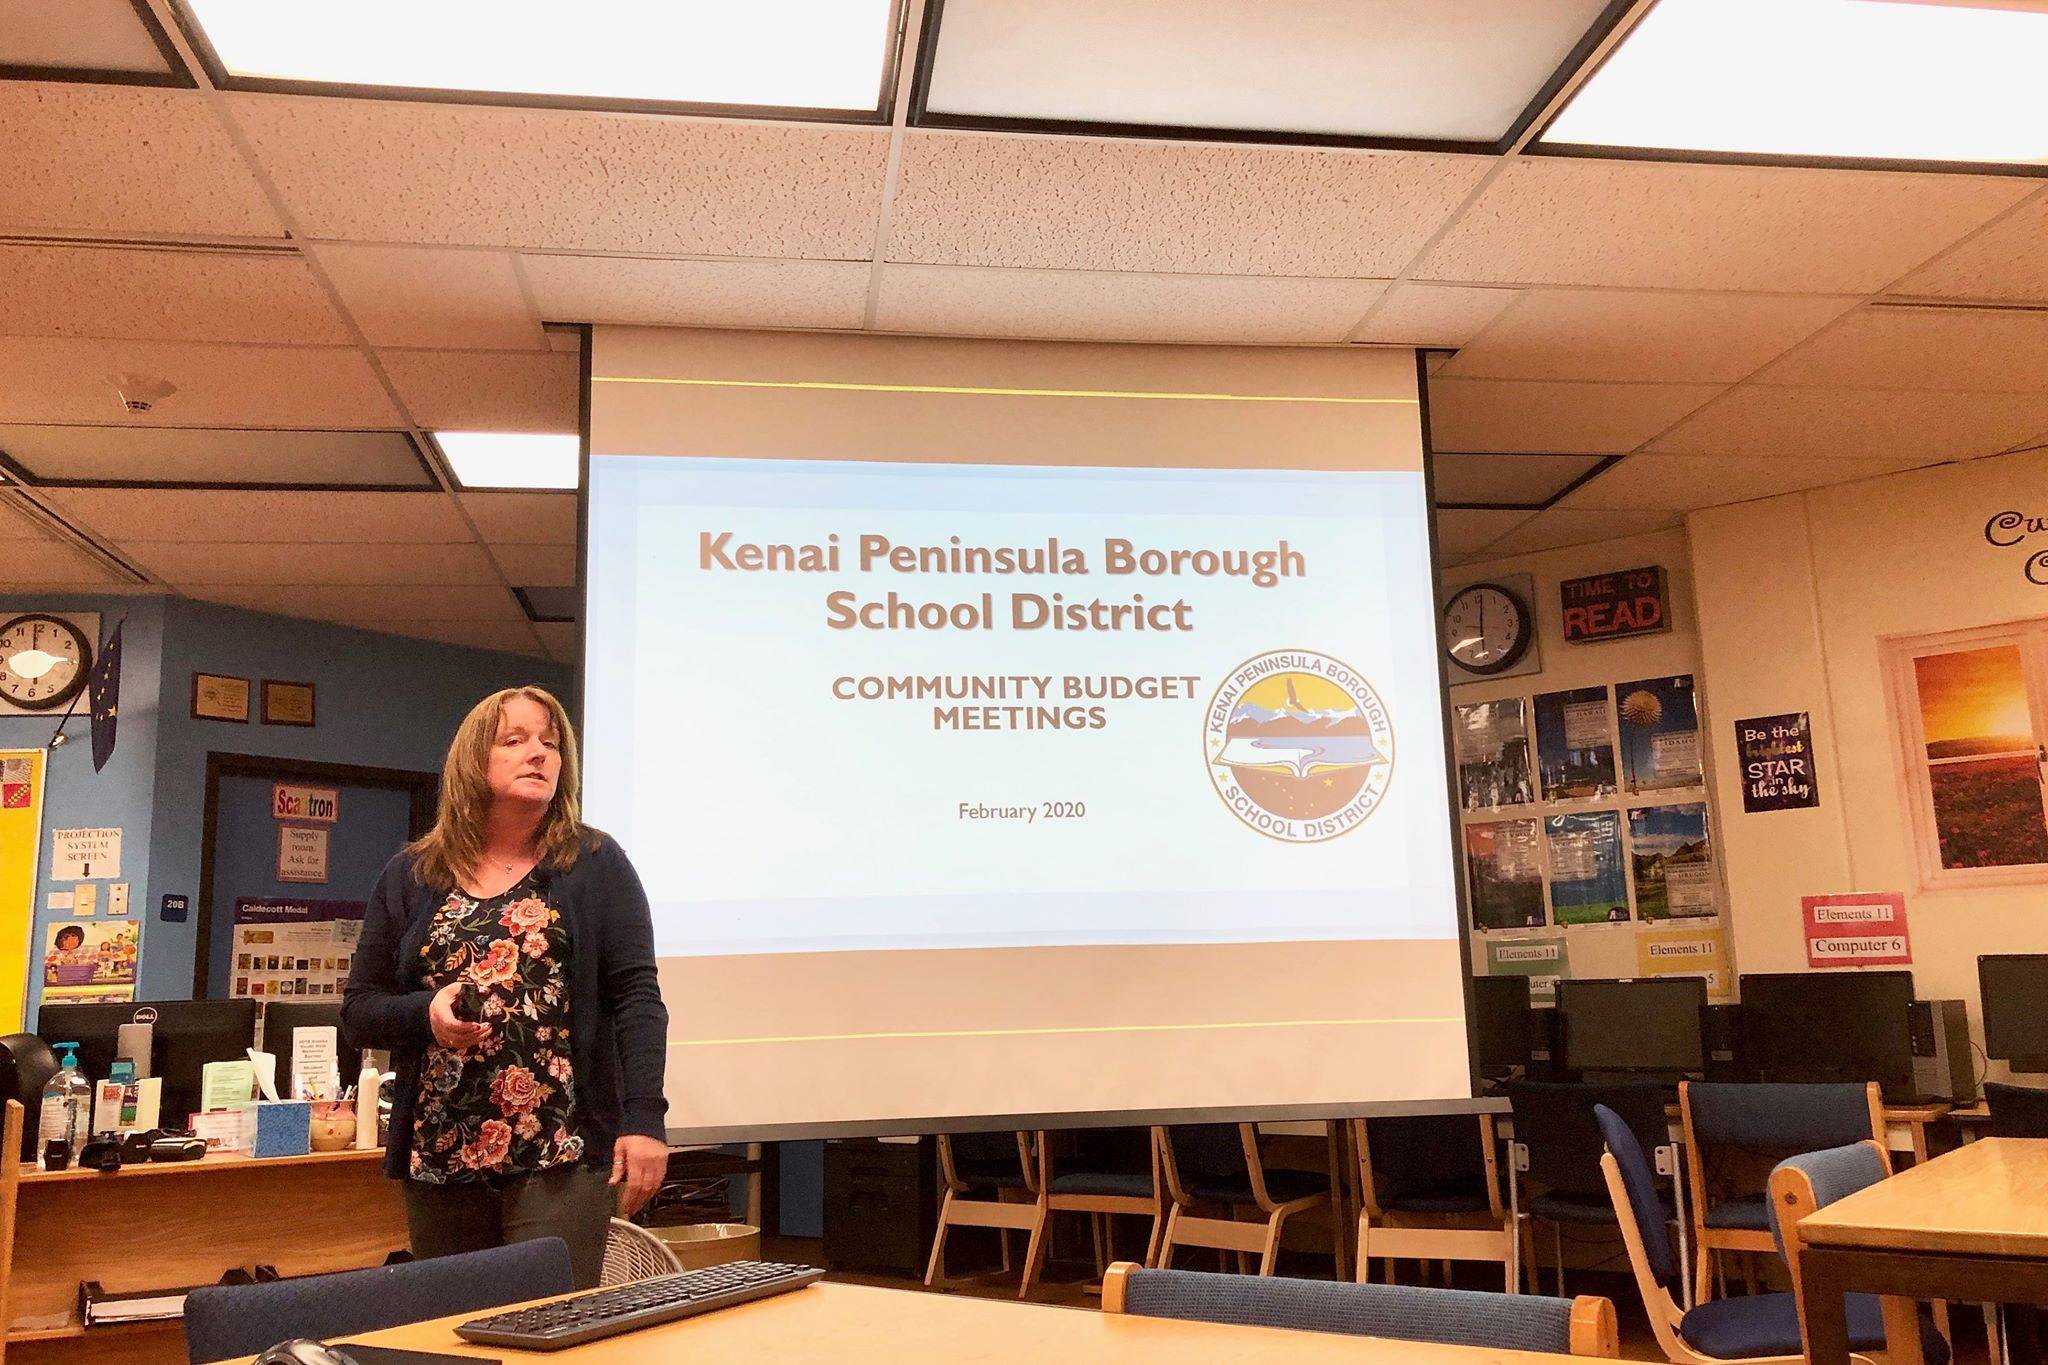 Kenai Peninsula Borough School District Finance Director Elizabeth Hayes gives a community budget presentation to a group of community members at Soldotna High School on Feb. 20, 2020, in Soldotna, Alaska. (Photo by Victoria Petersen/Peninsula Clarion)